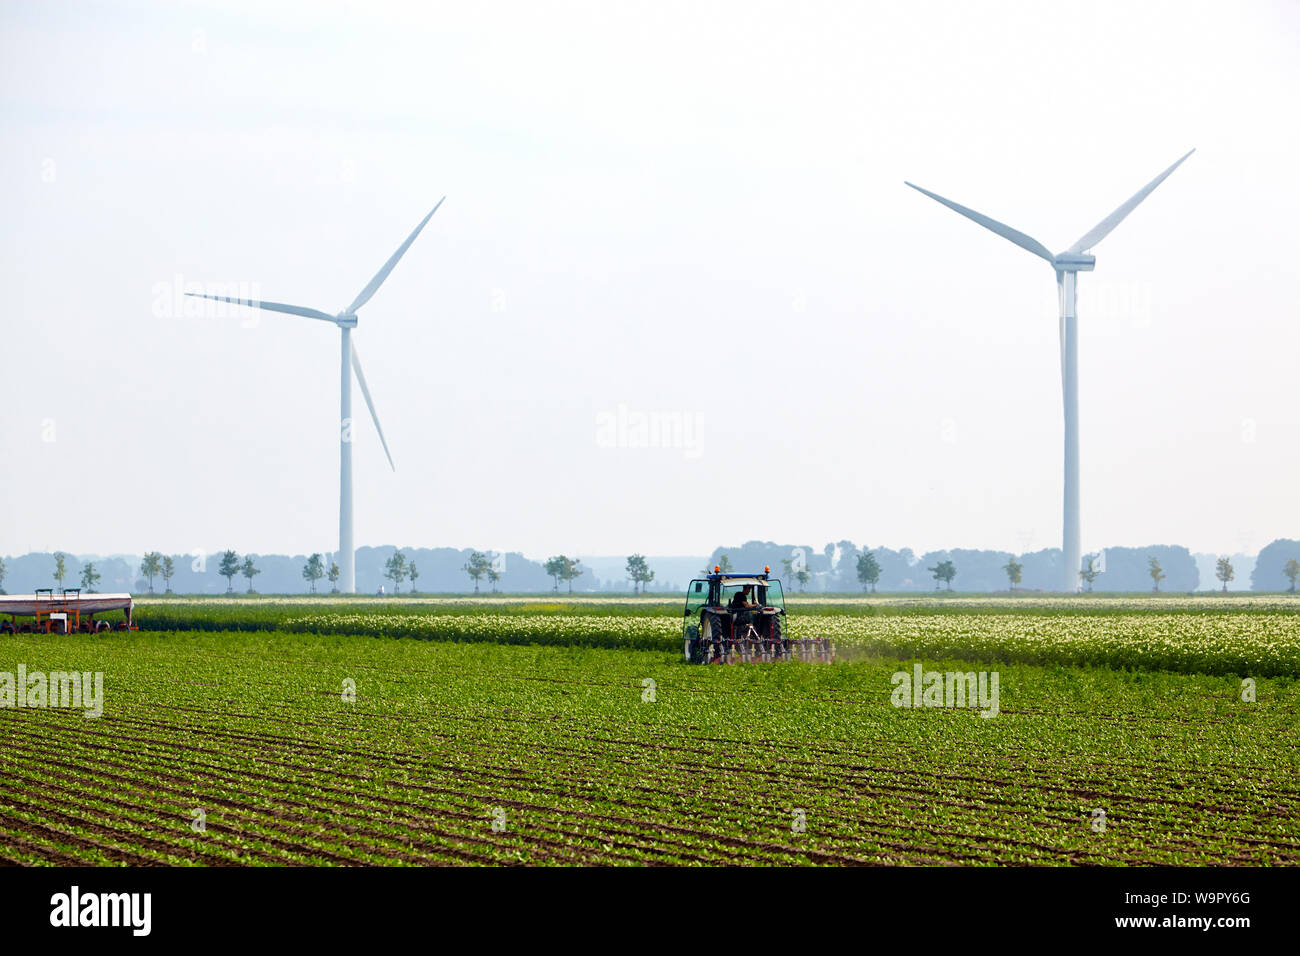 Farming plot with tractor harrowing the soil between rows of cultivated chicory plants with two wind turbines in the background Stock Photo